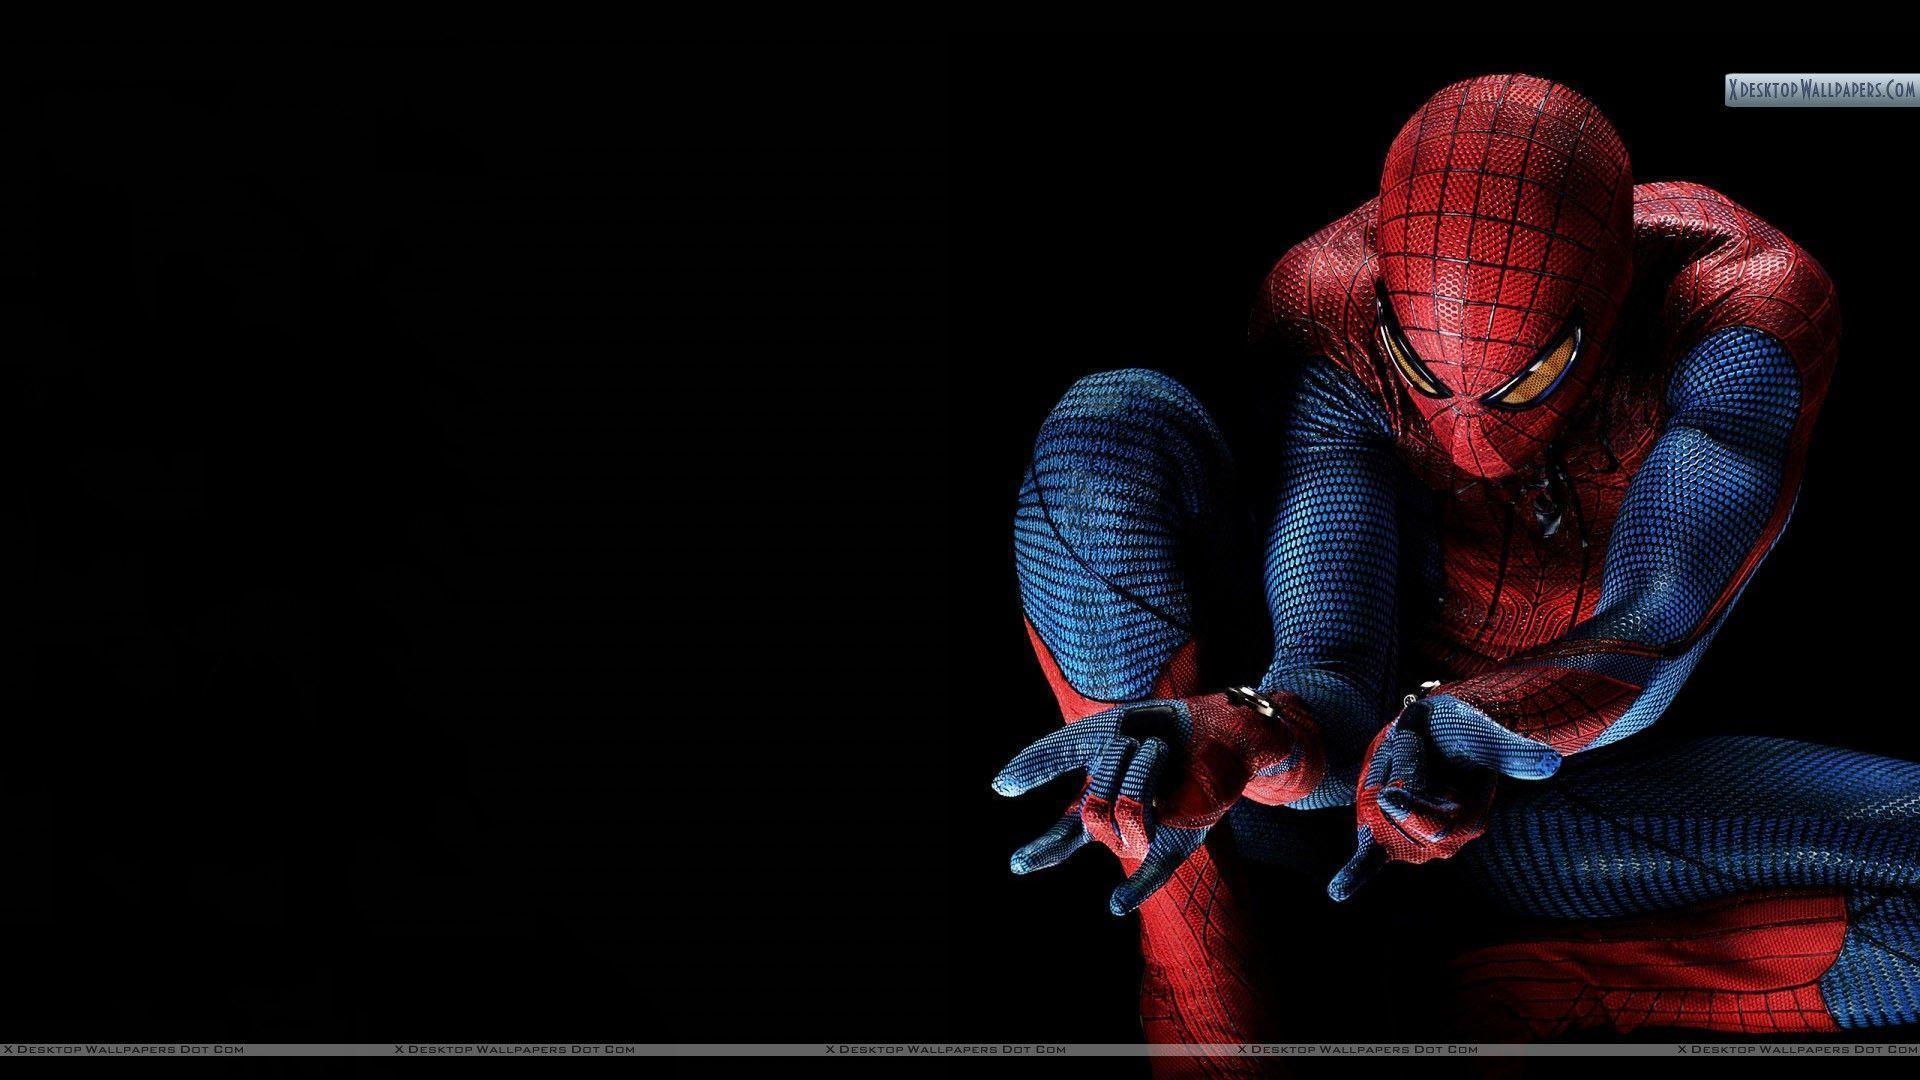 Spiderman 4 Wallpaper Free Download, Download This Wallpaper Use